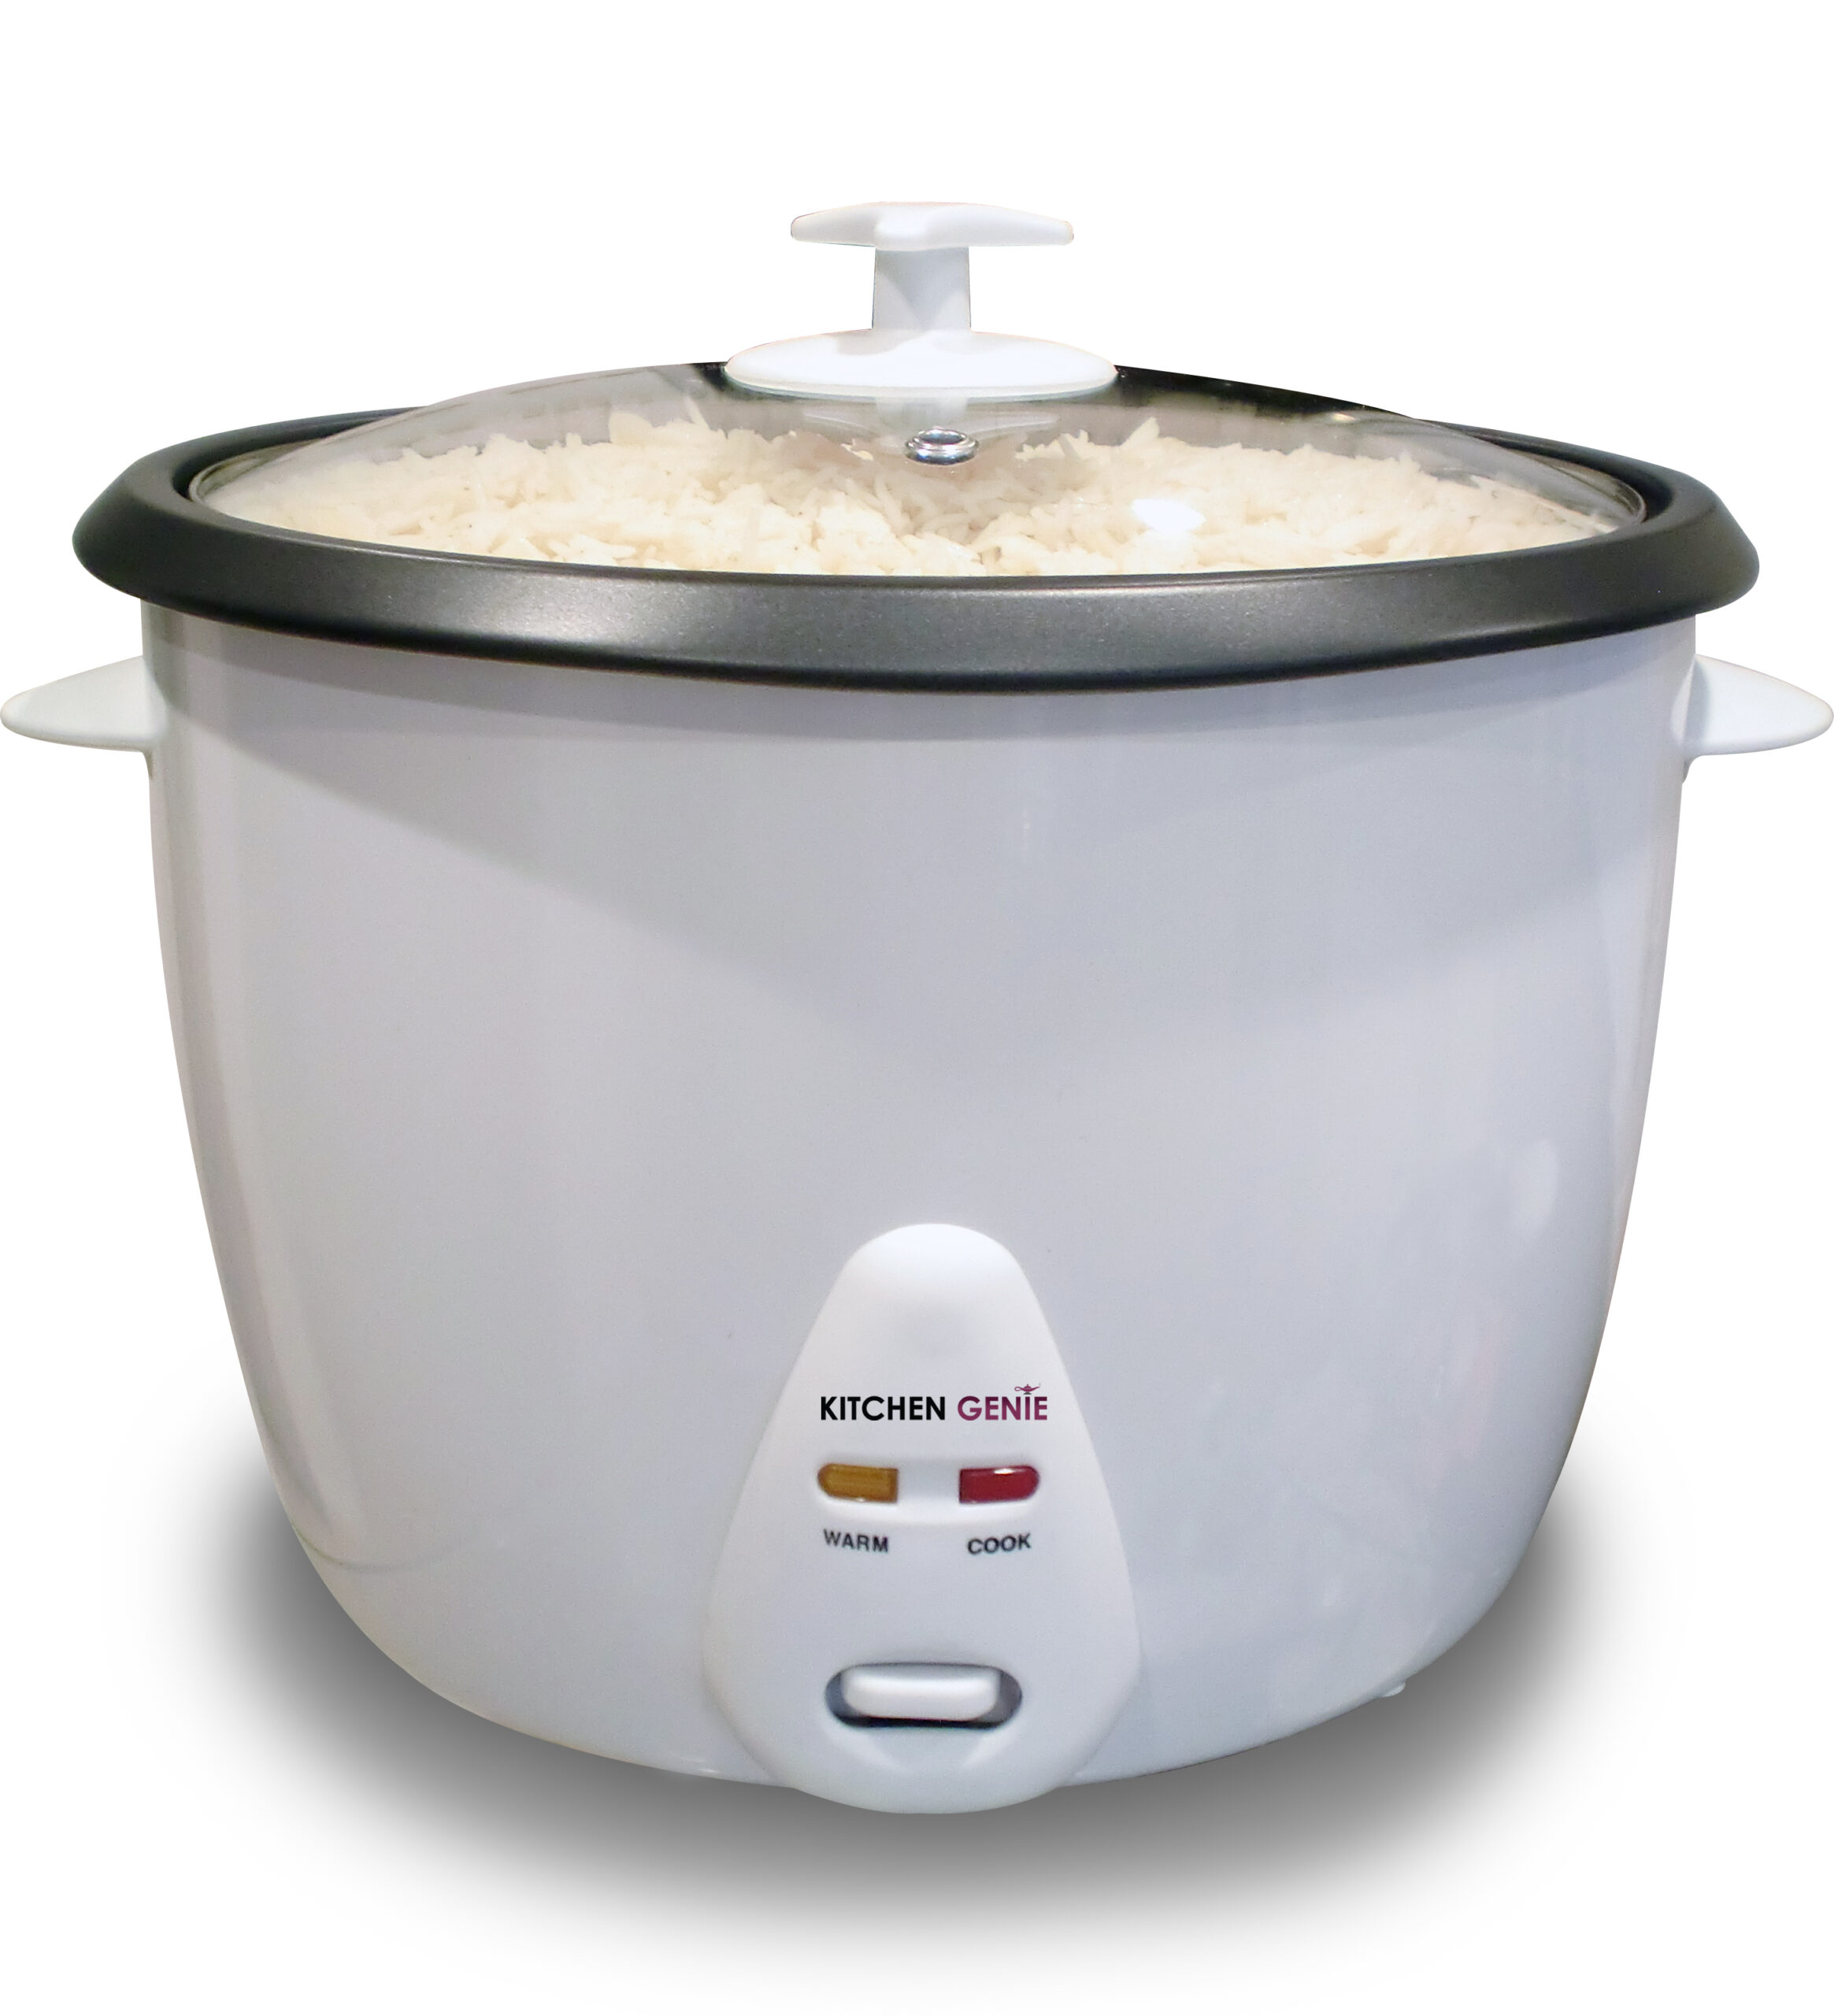 New Kitchen Genie Deluxe Rice Cooker – 16 Cup Capacity